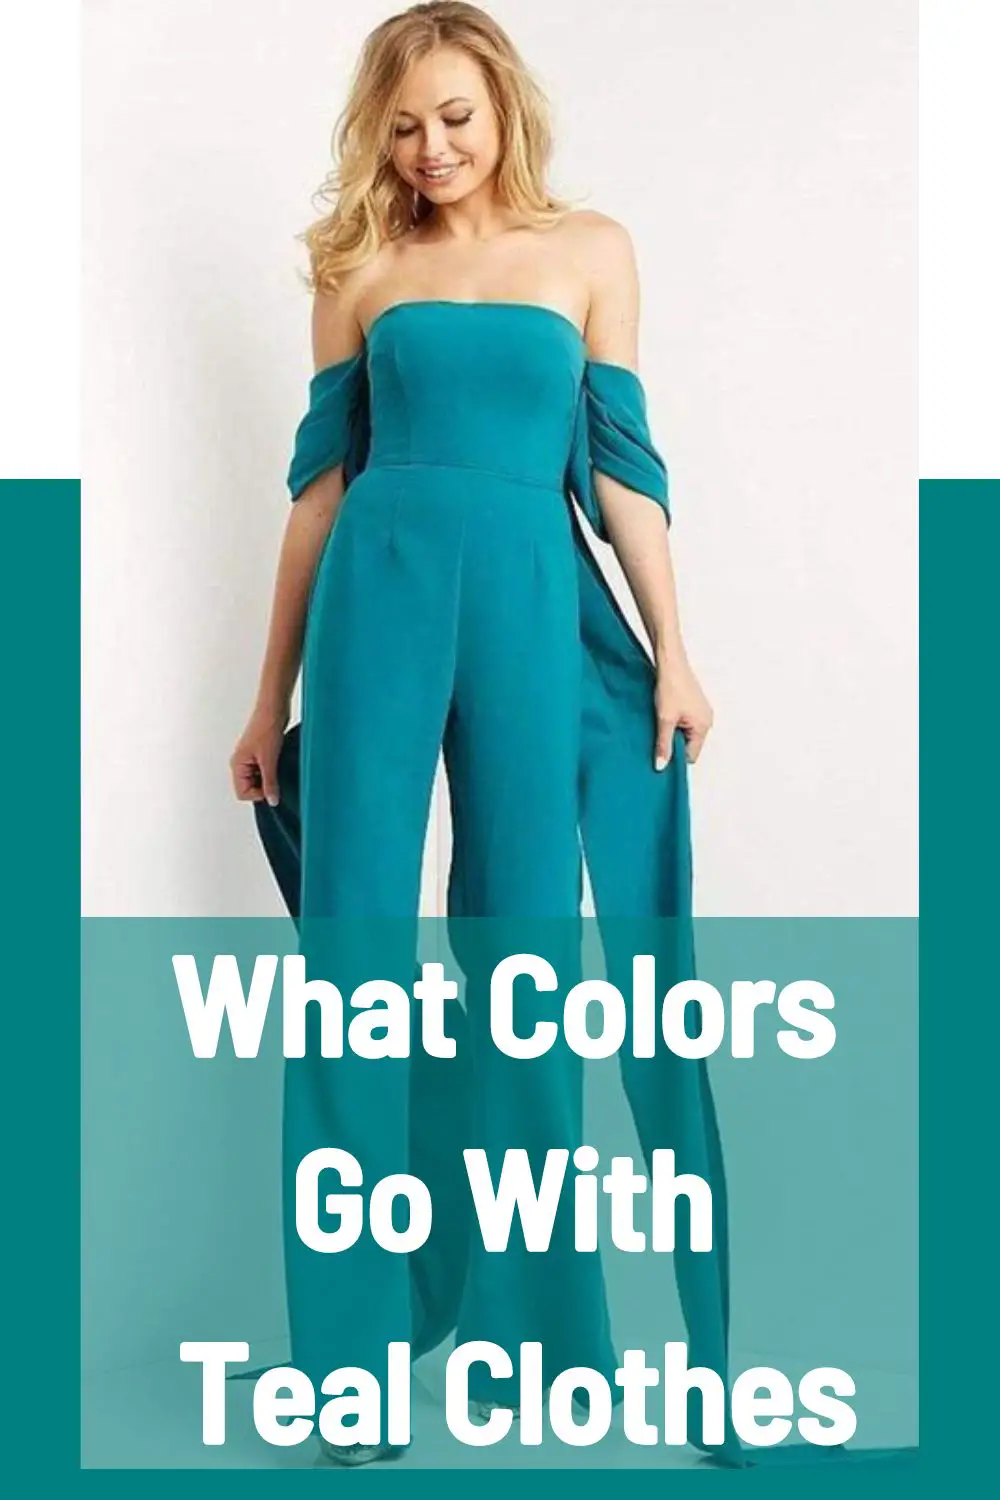 What-Colors-Go-With-Teal-Clothes